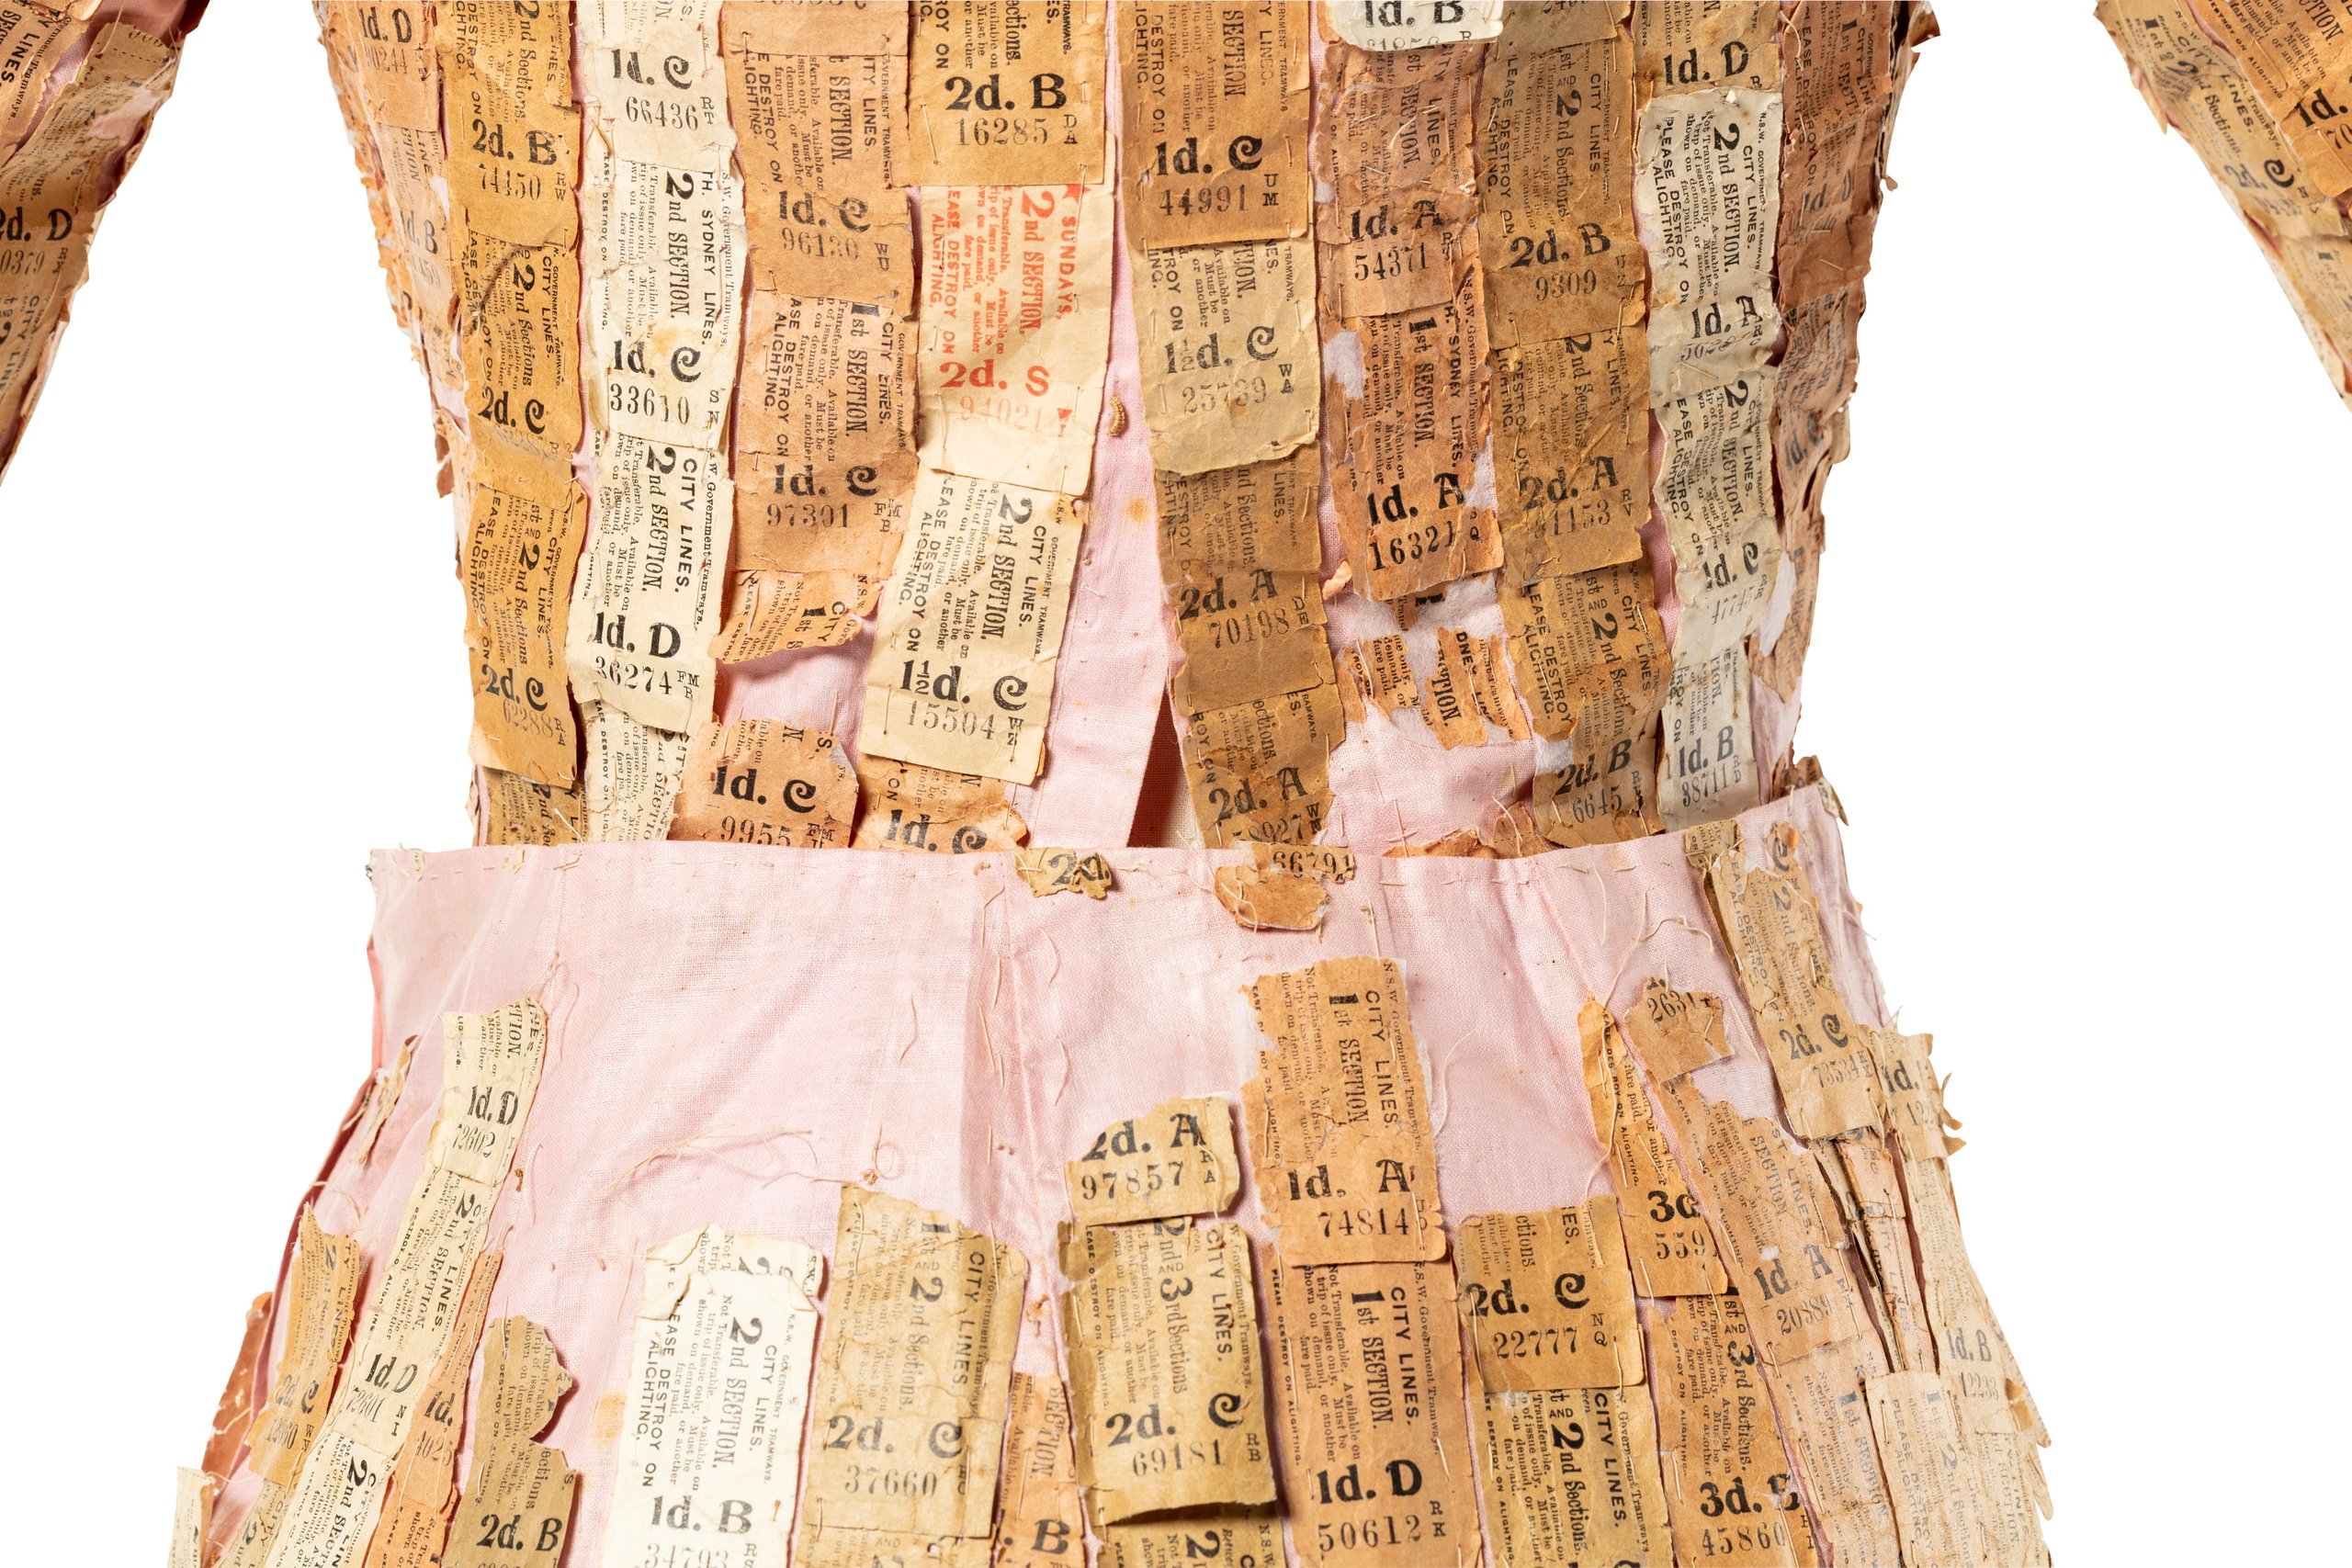 Dress decorated with tram tickets